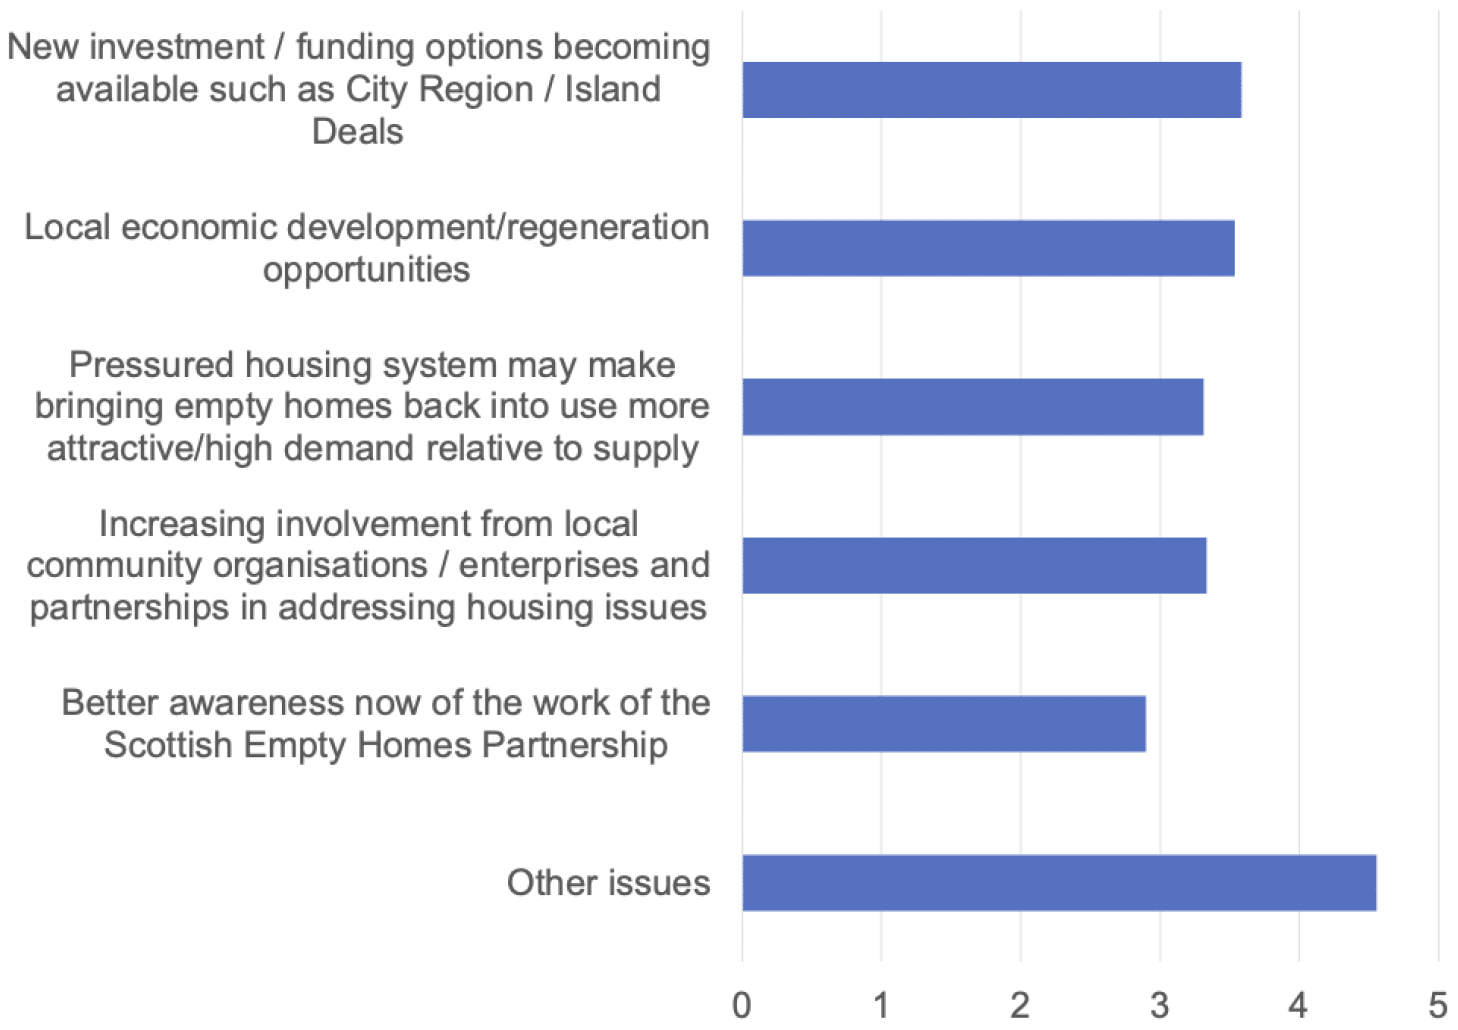 A horizontal bar chart showing positive factors that help bring homes back into use. The factors are scored from 1 = no impact at all to 5 = a significant impact. The chart presents the average score for each factor, with new investment / funding options receiving the highest score and better awareness of the Scottish Empty Homes Partnership scoring the lowest.